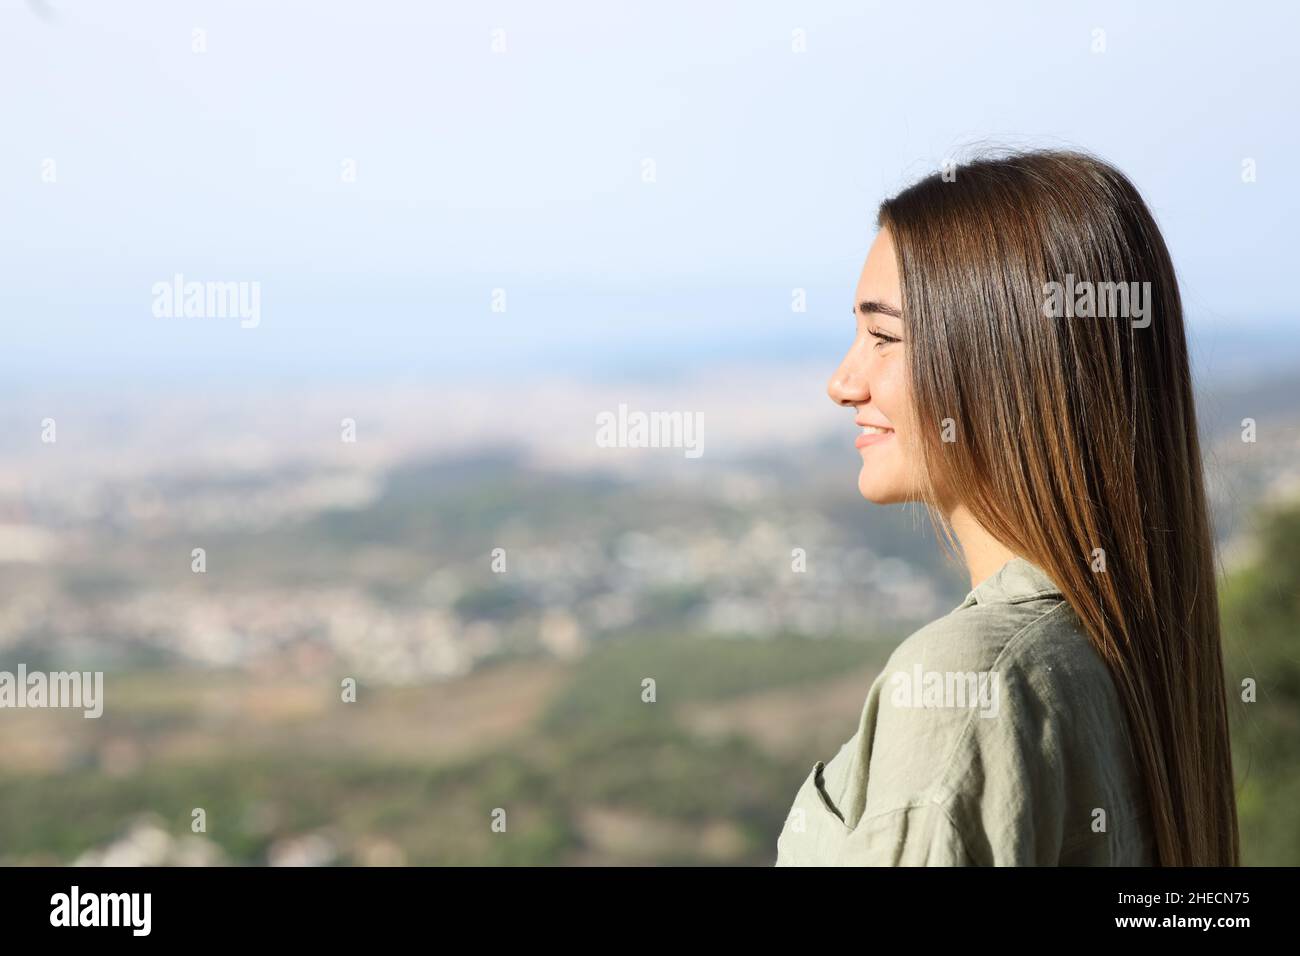 Side view porrtait of a happy teen contemplating views standing outdoors Stock Photo